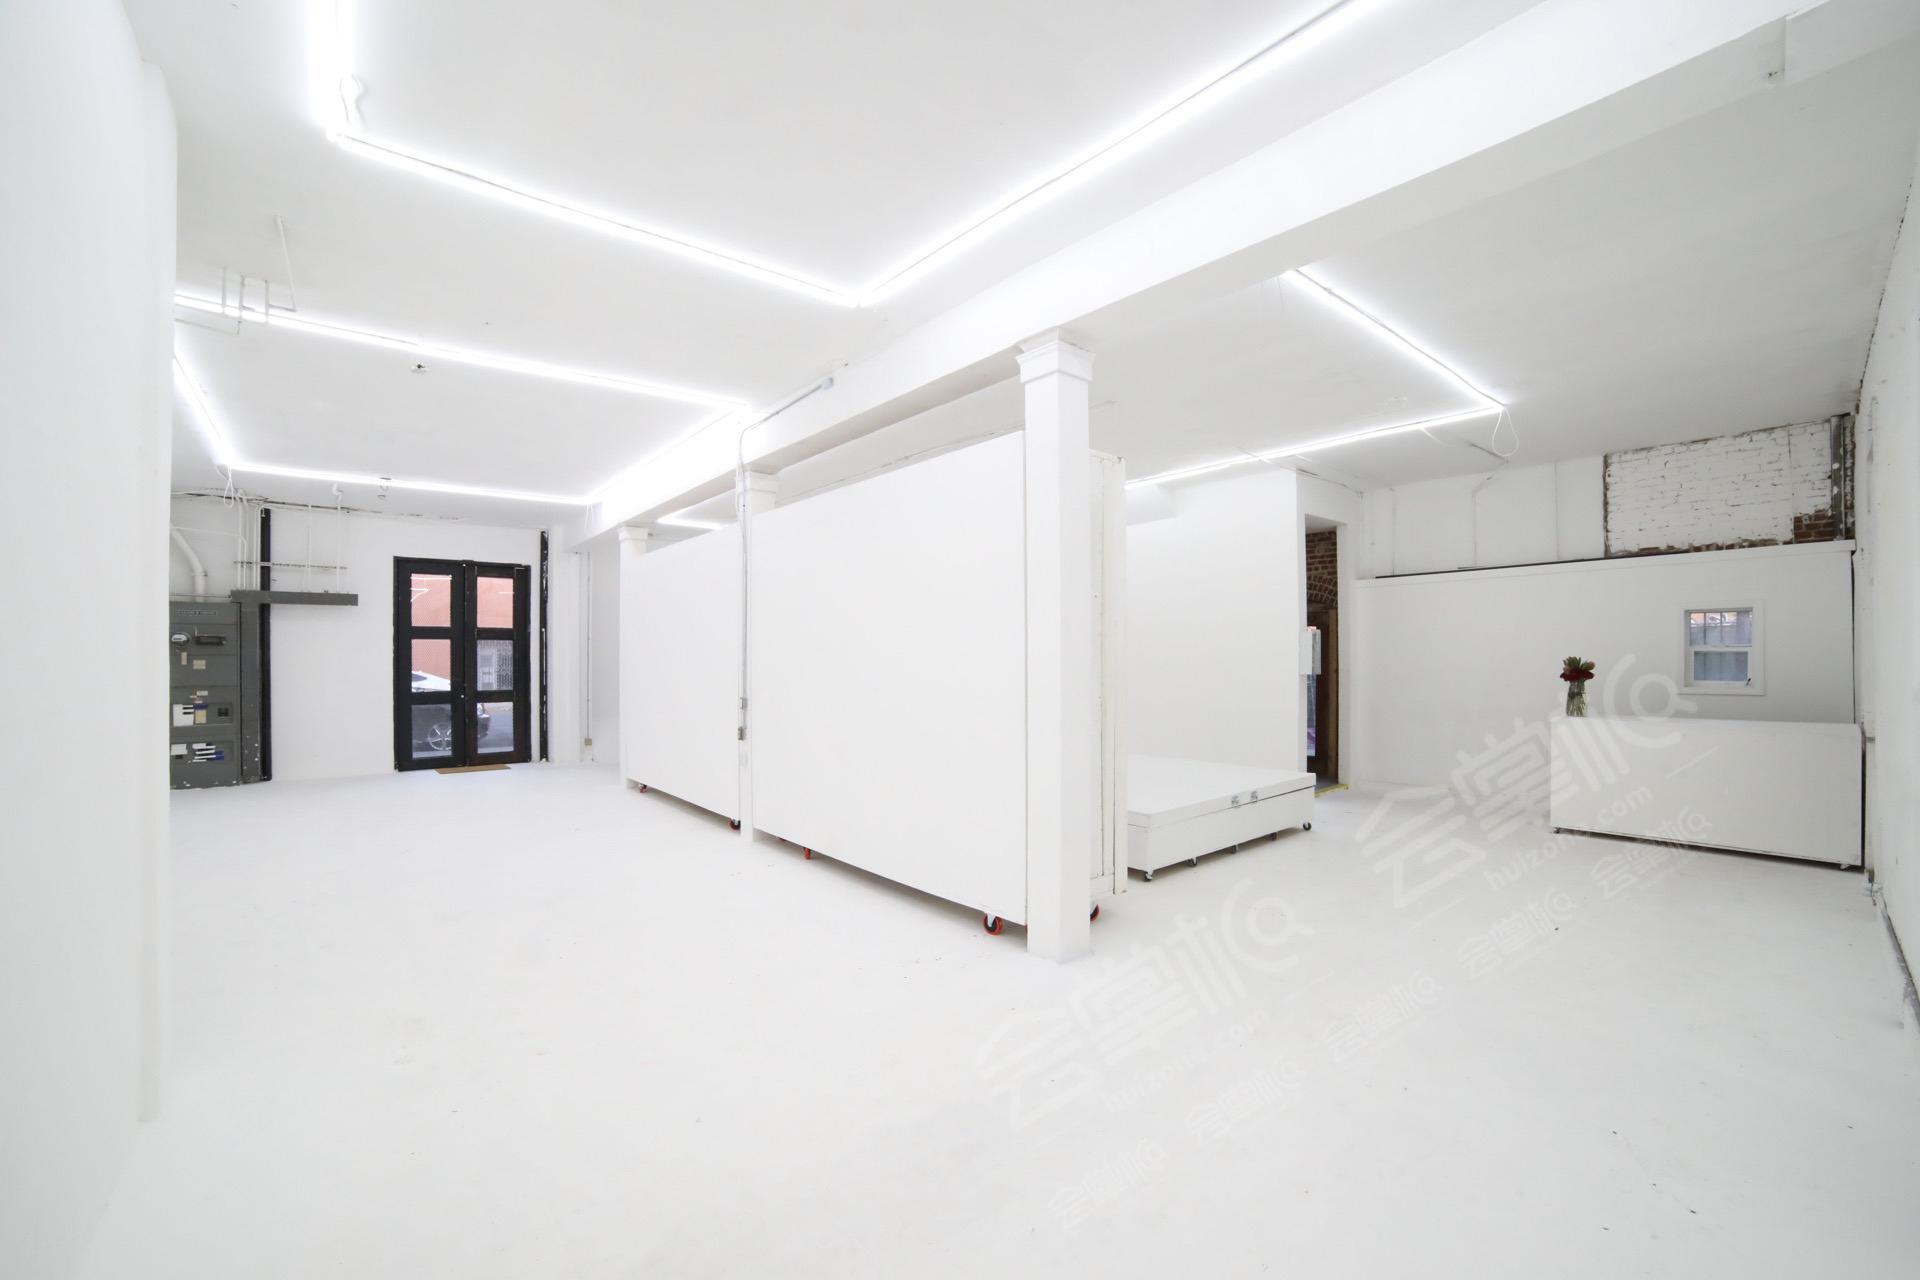 Spacious Downtown Gallery & Studio with Cyclorama